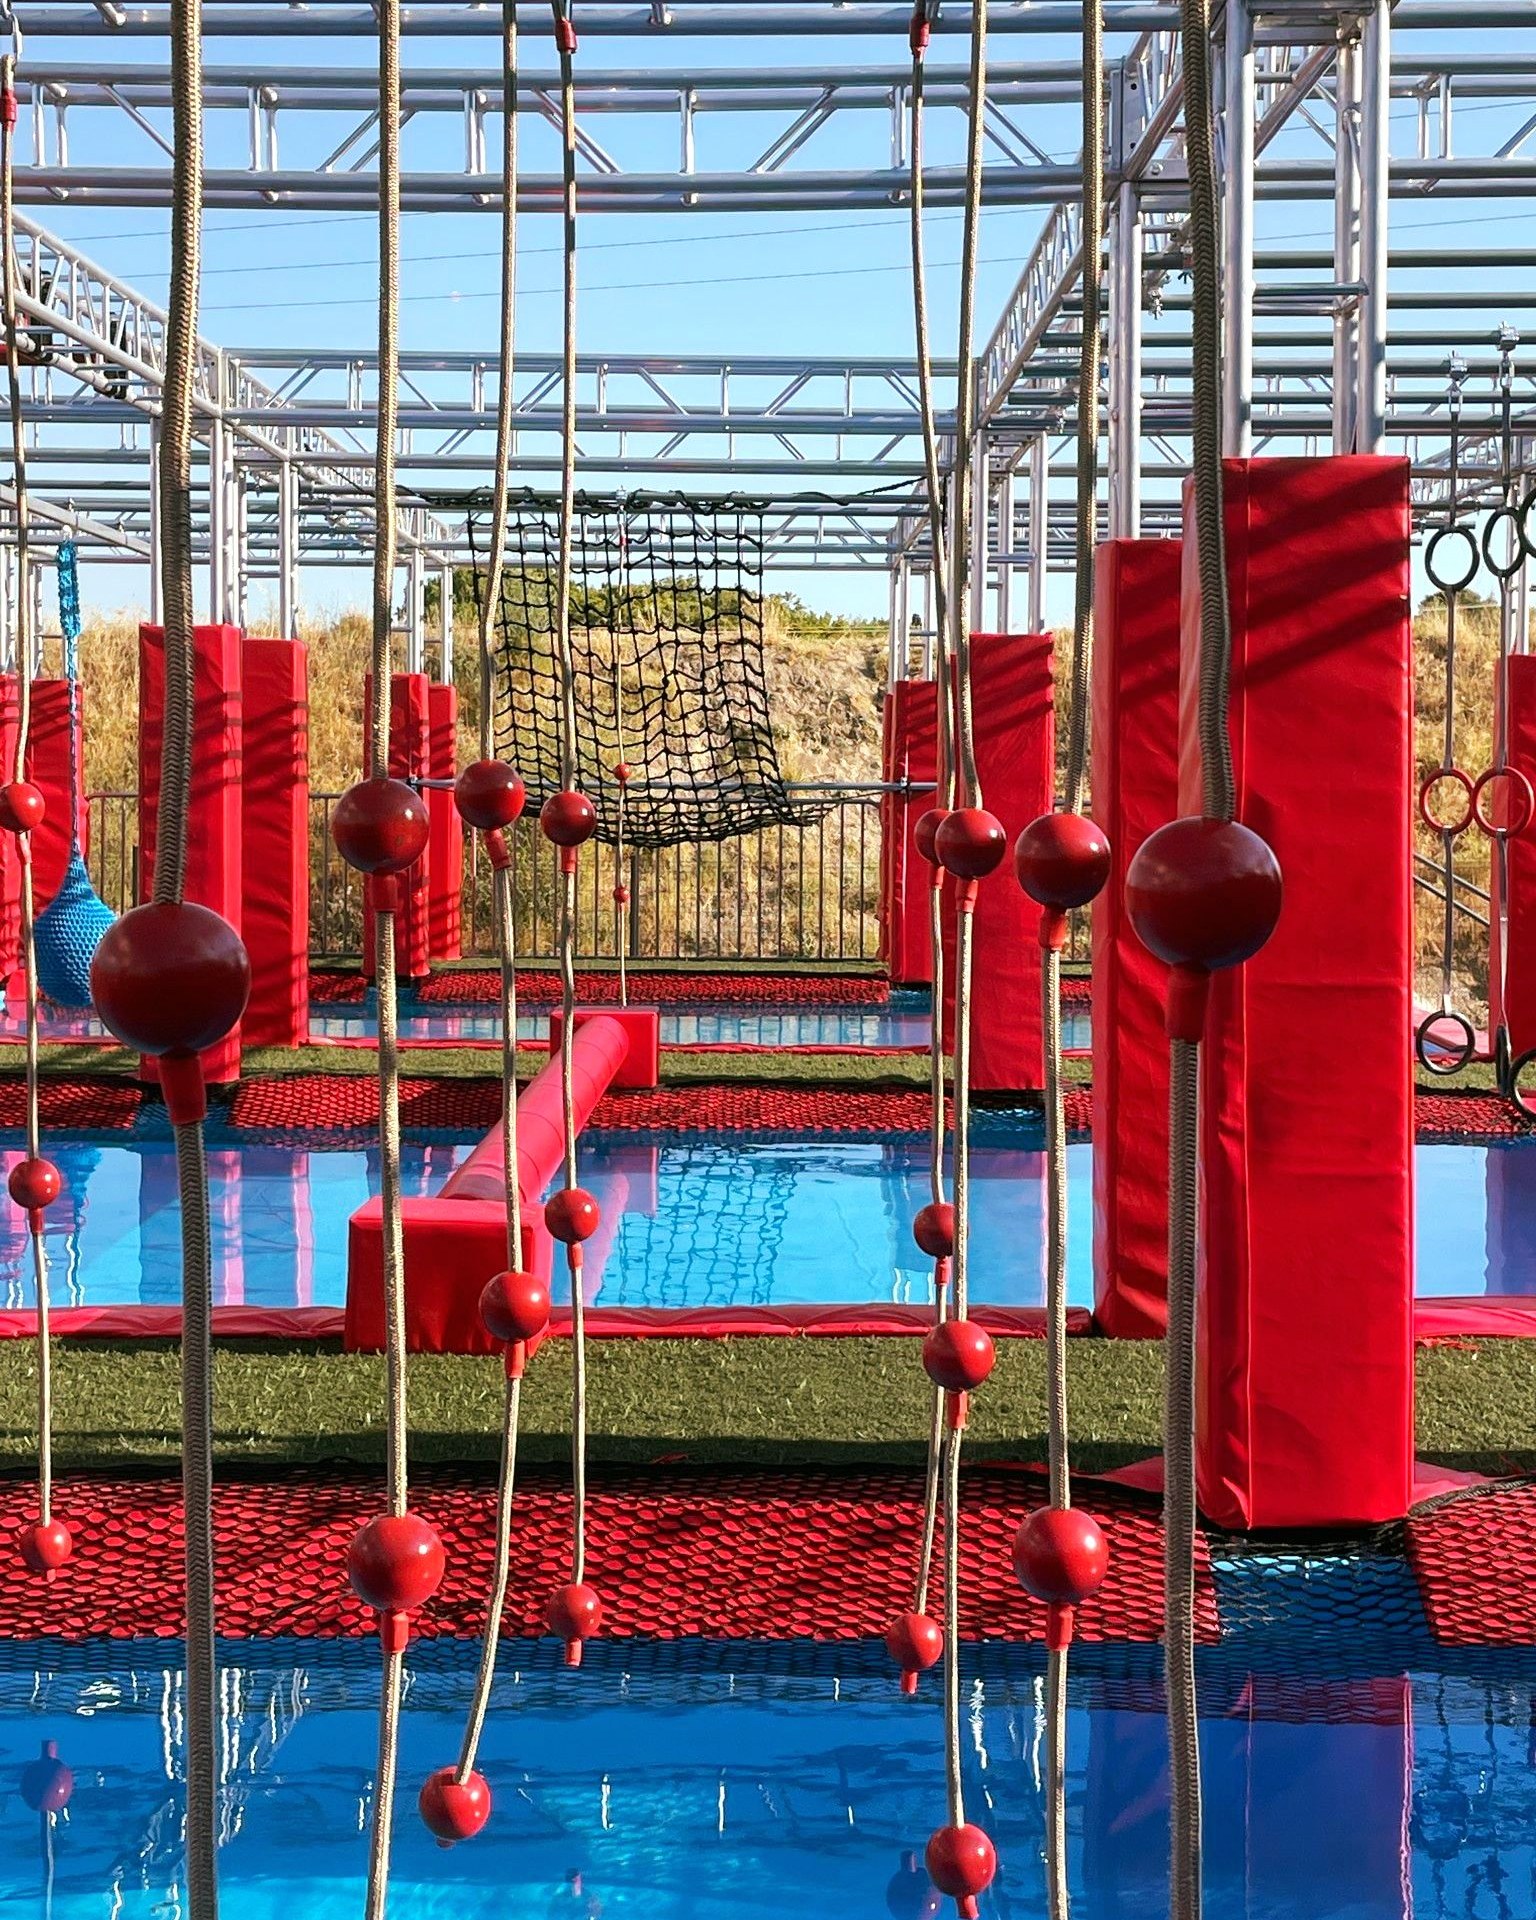 What if there was an American Ninja Warrior waterpark? - American